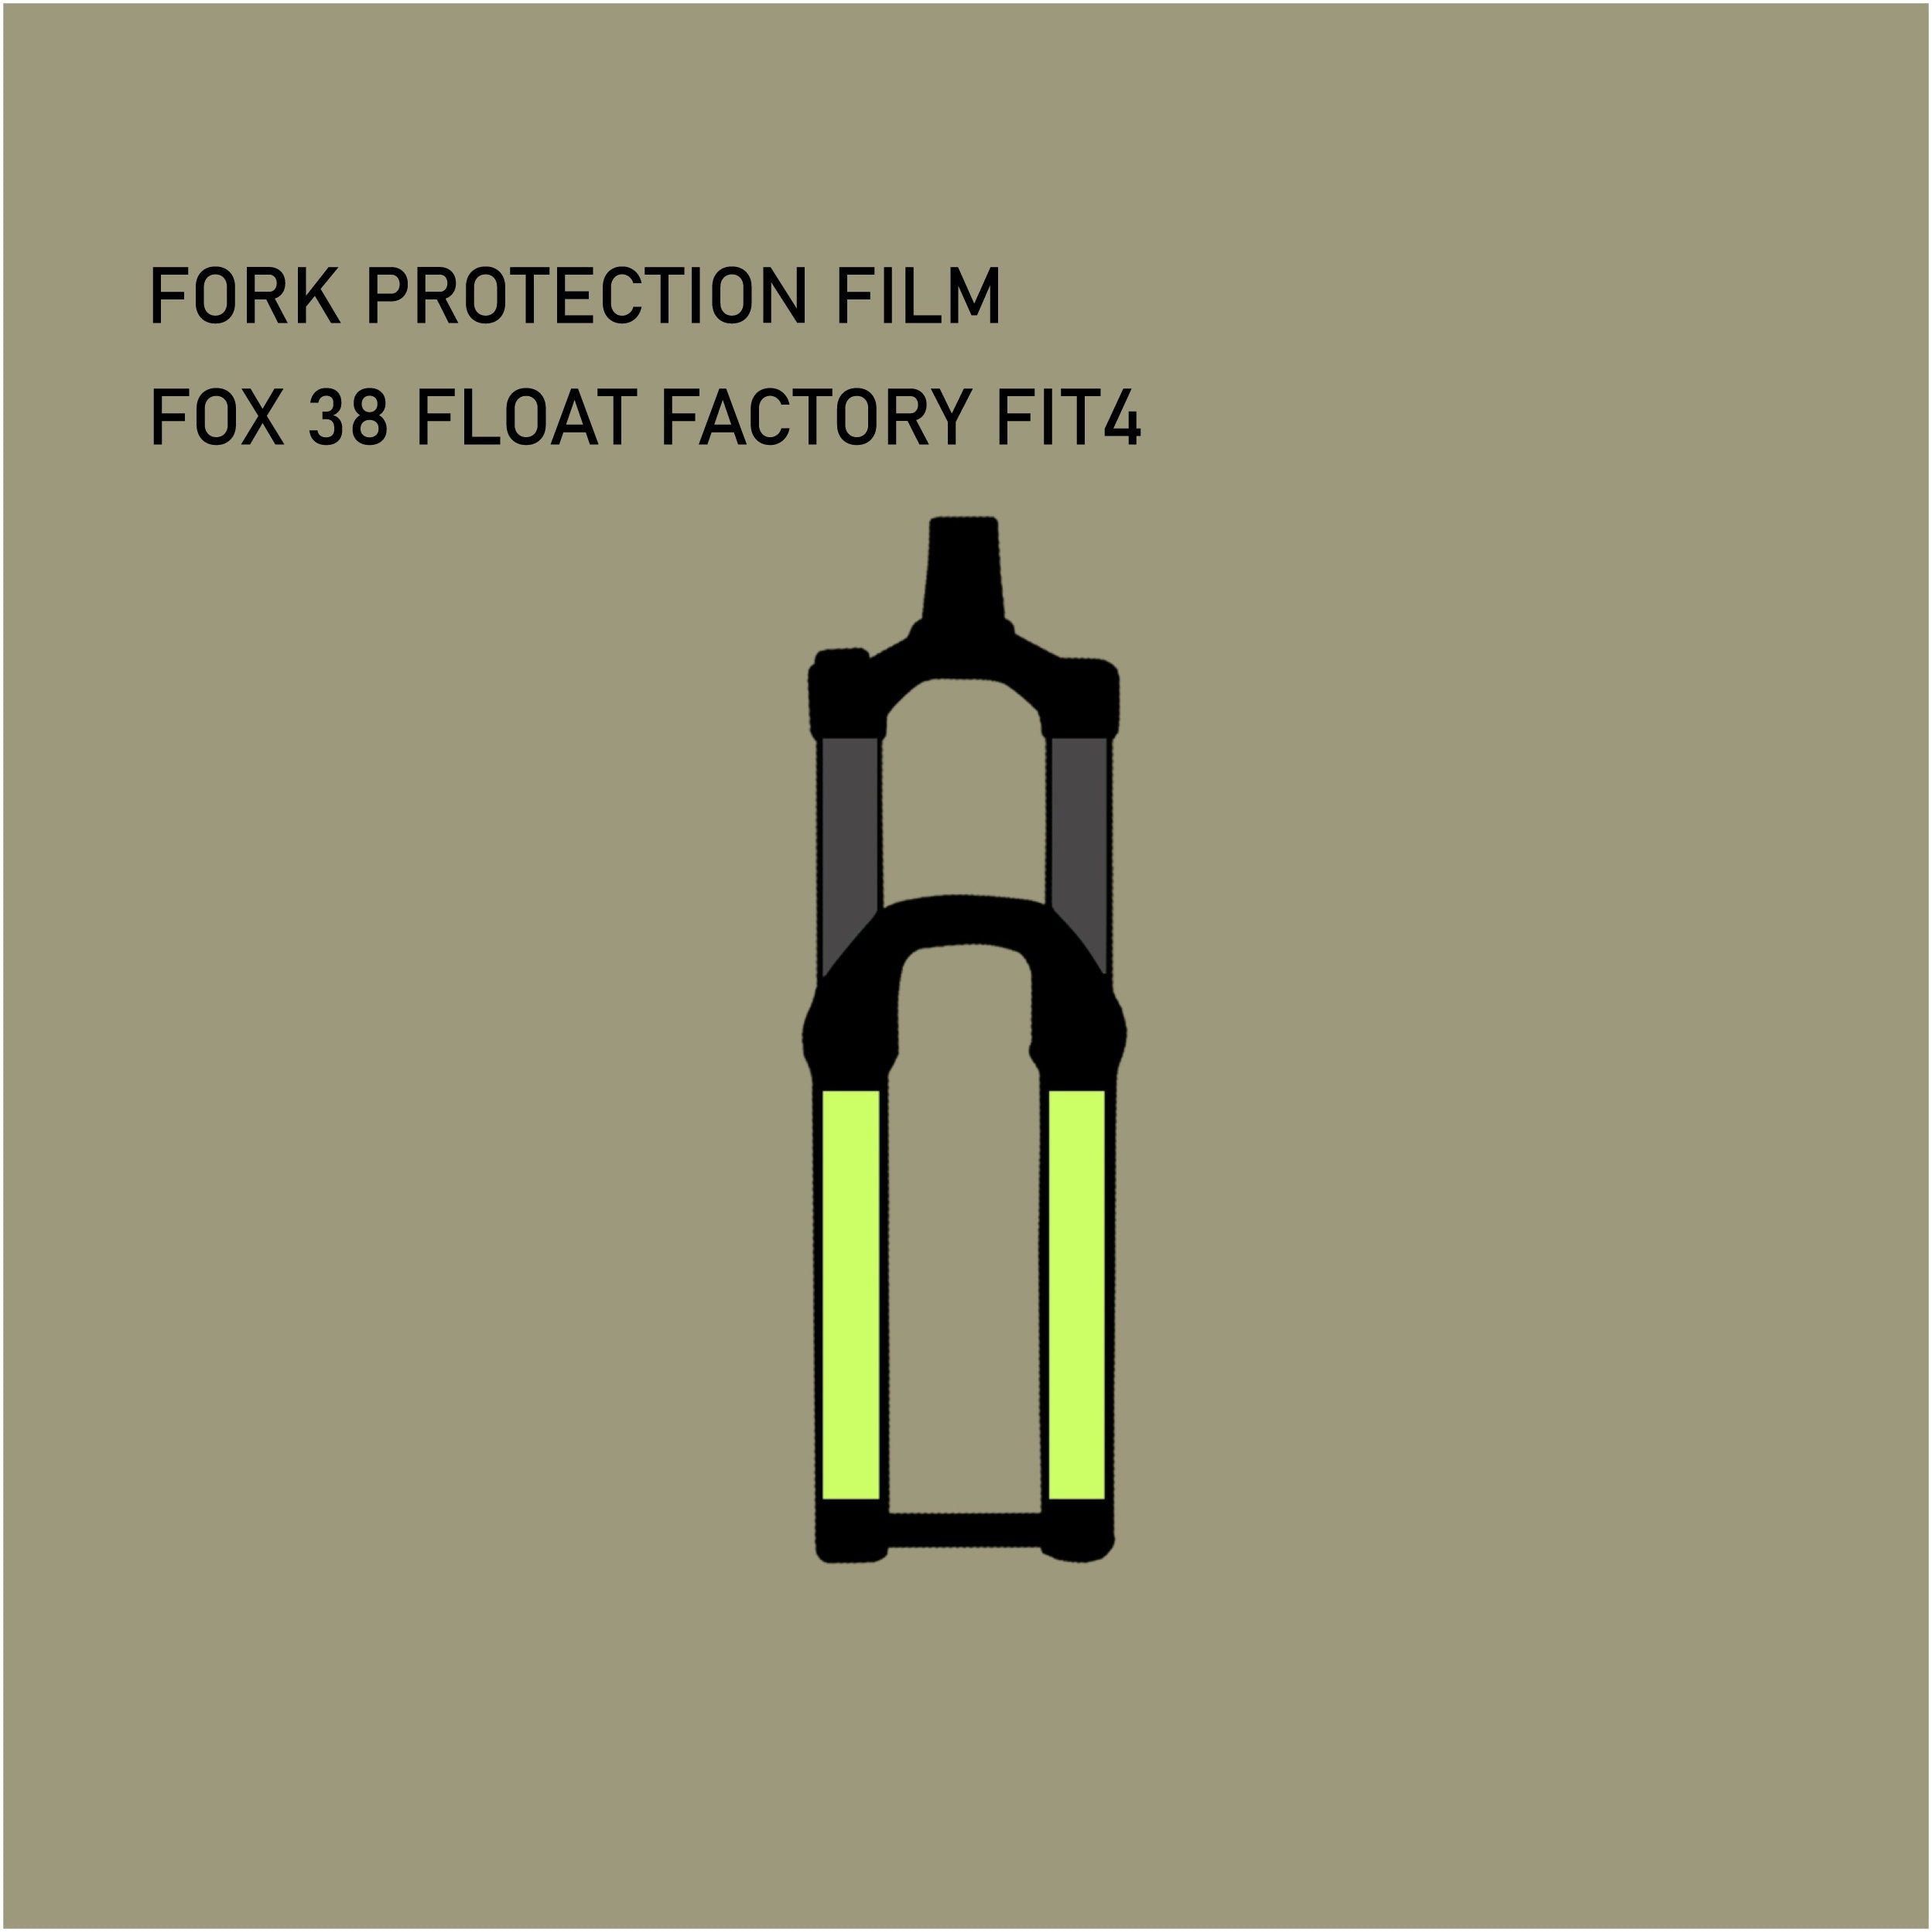 Fork Protector Film for Fox 38 Float Factory FIT4 170mm 27.5"